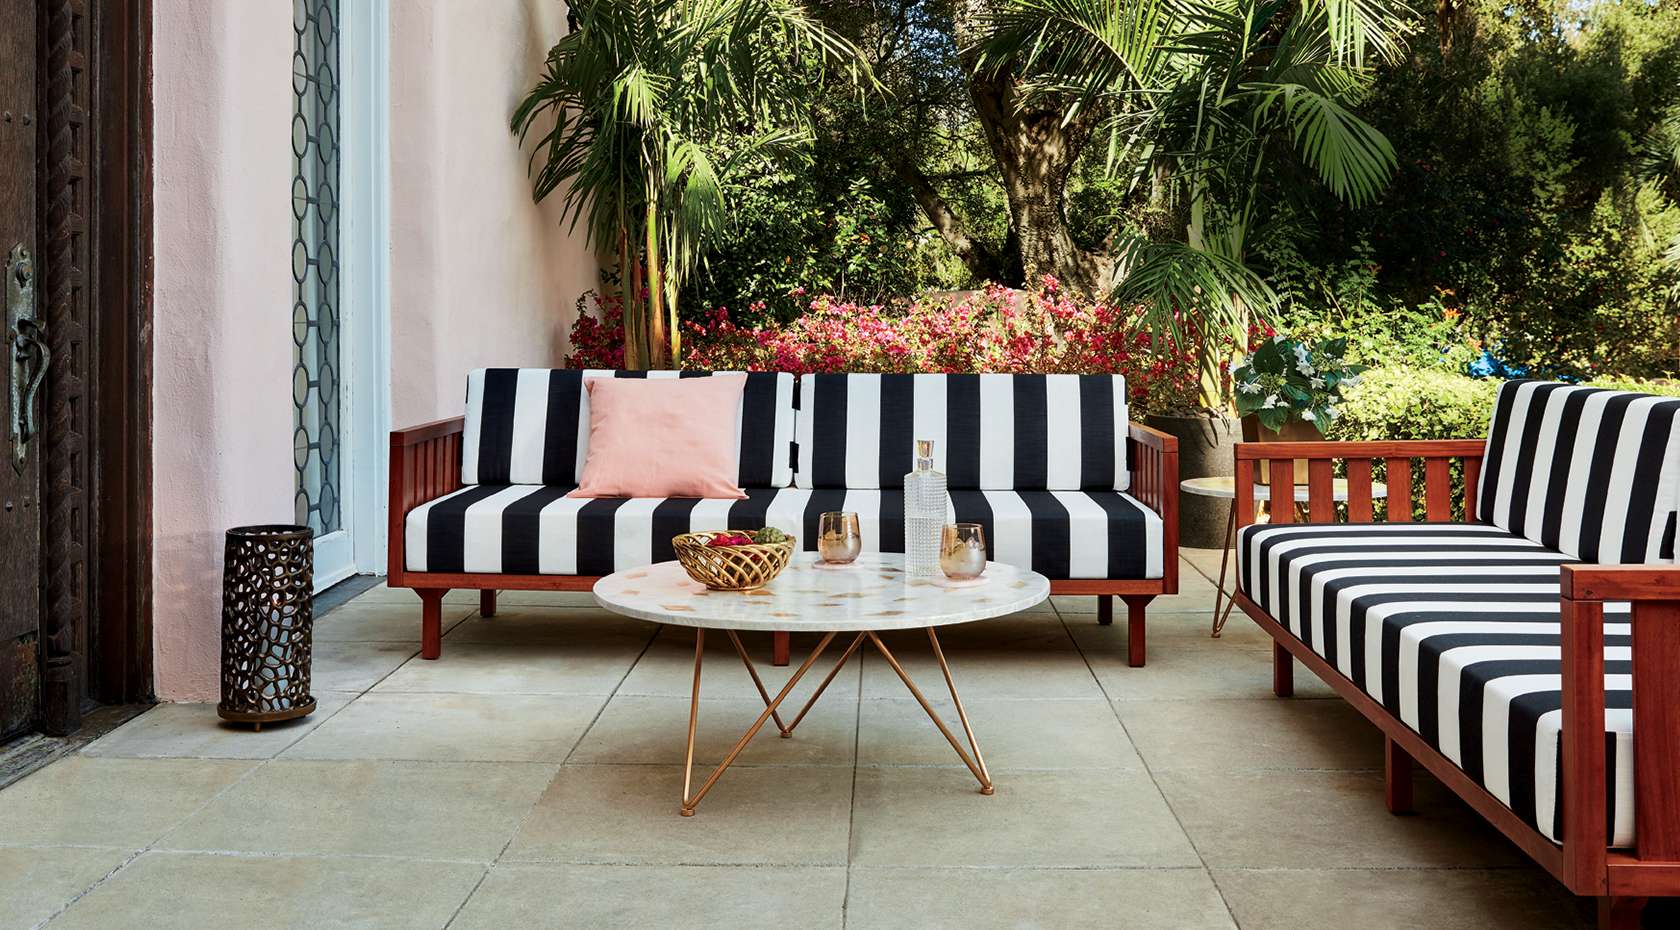 The 8 Designer Pieces You Need for Outdoor Lounging